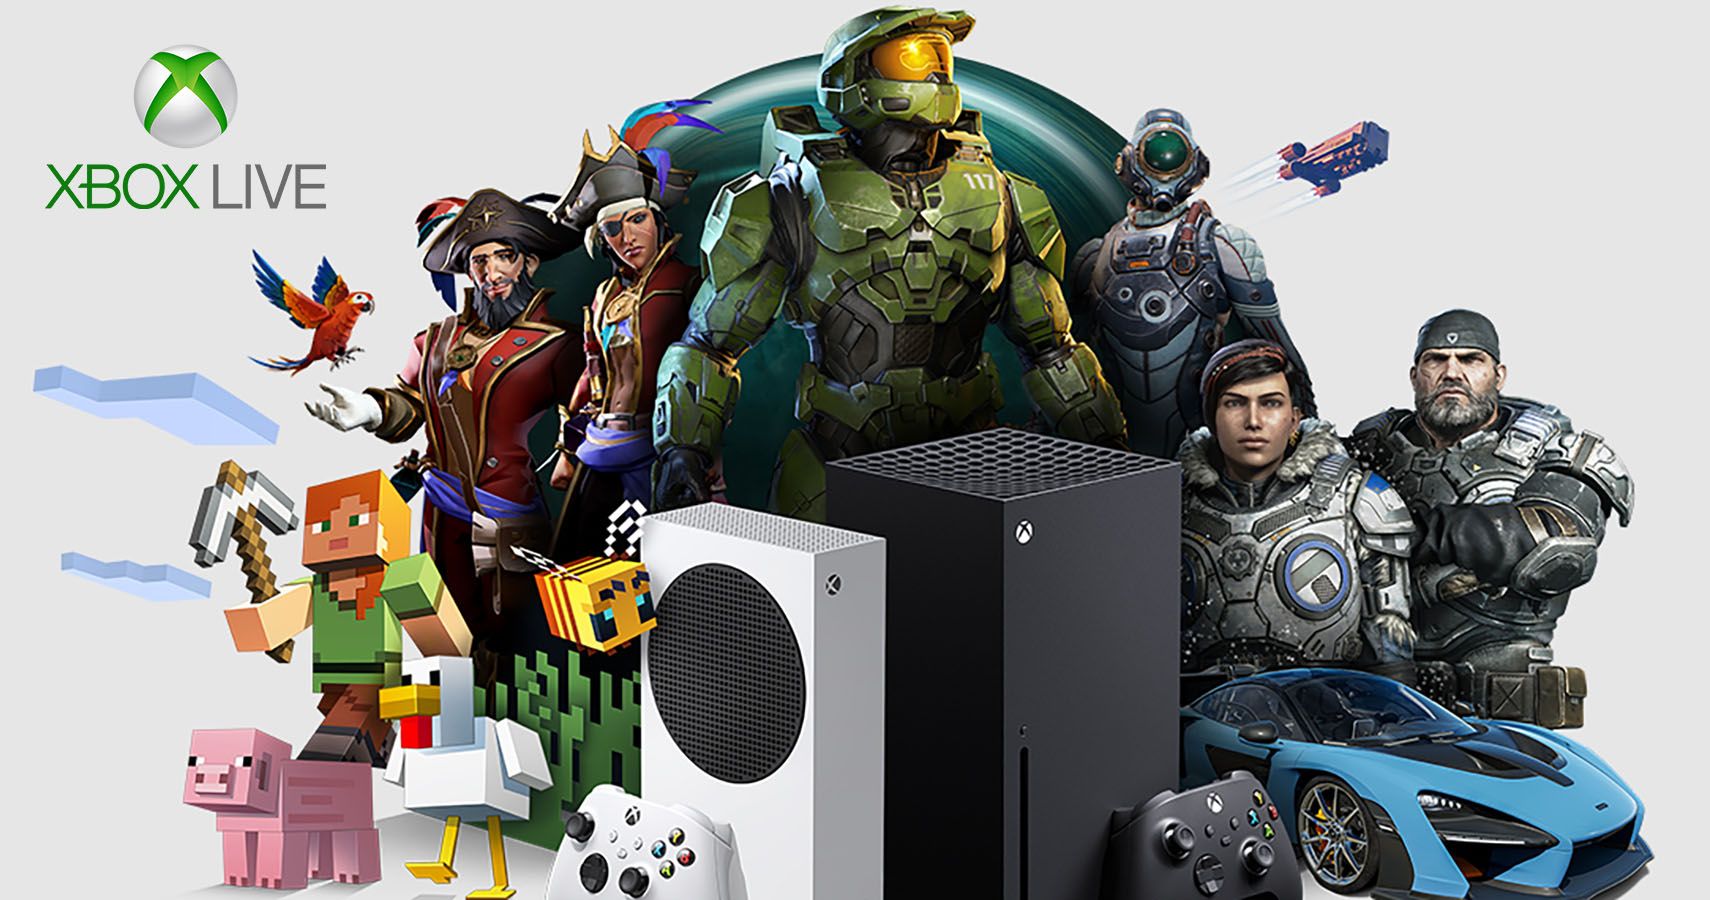 Official promotional image for Xbox All Access from Microsoft with Xbox Live logo